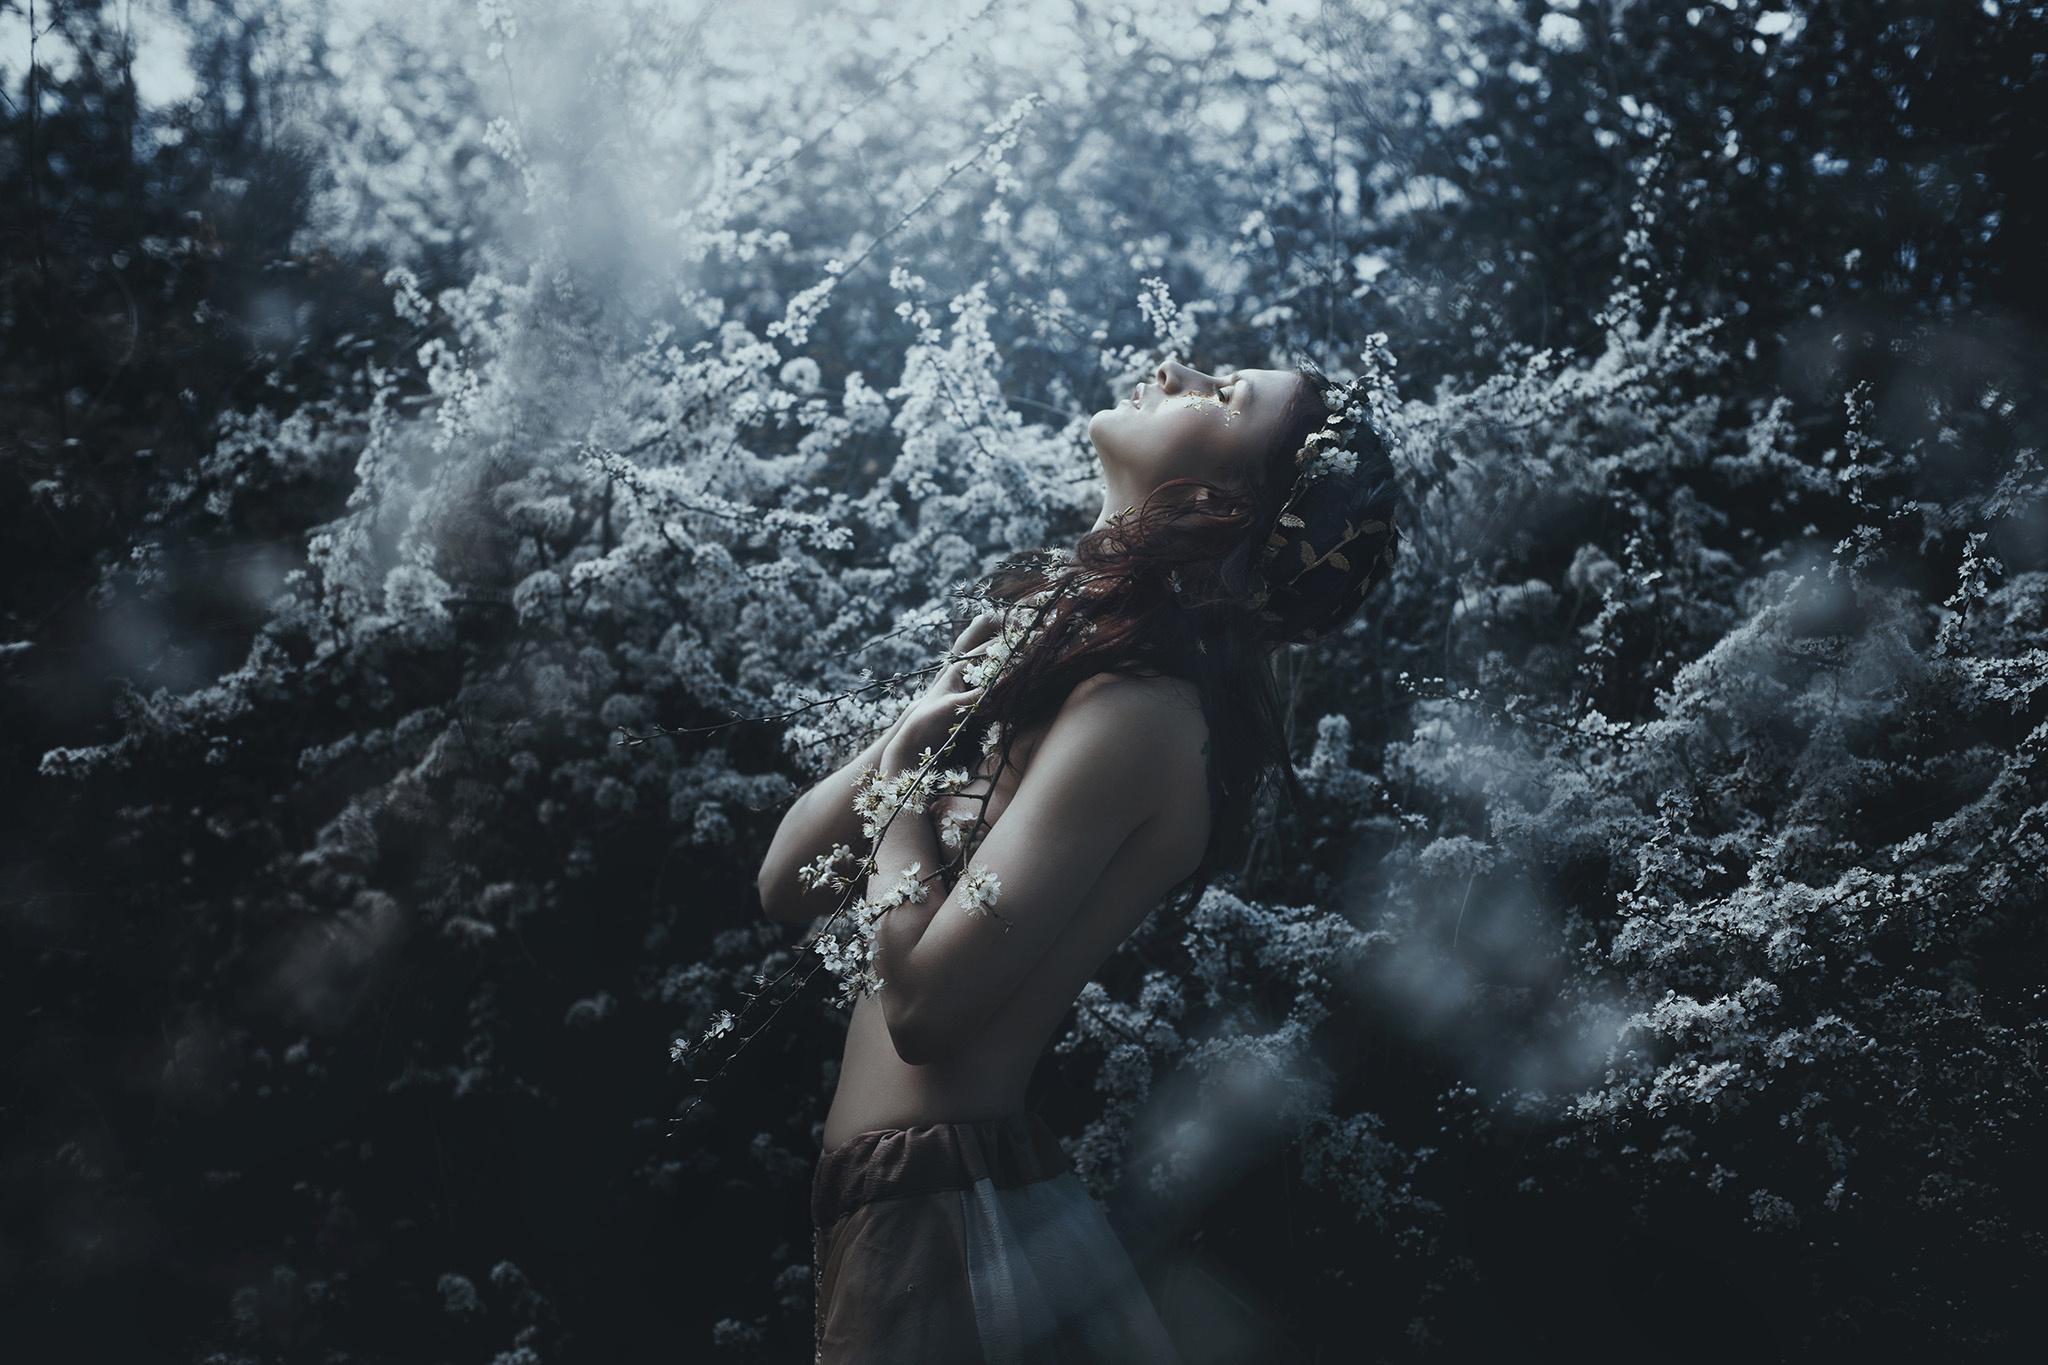 500px Blog Get Lost in The Sublime Faerie Worlds of 500pxer Bella